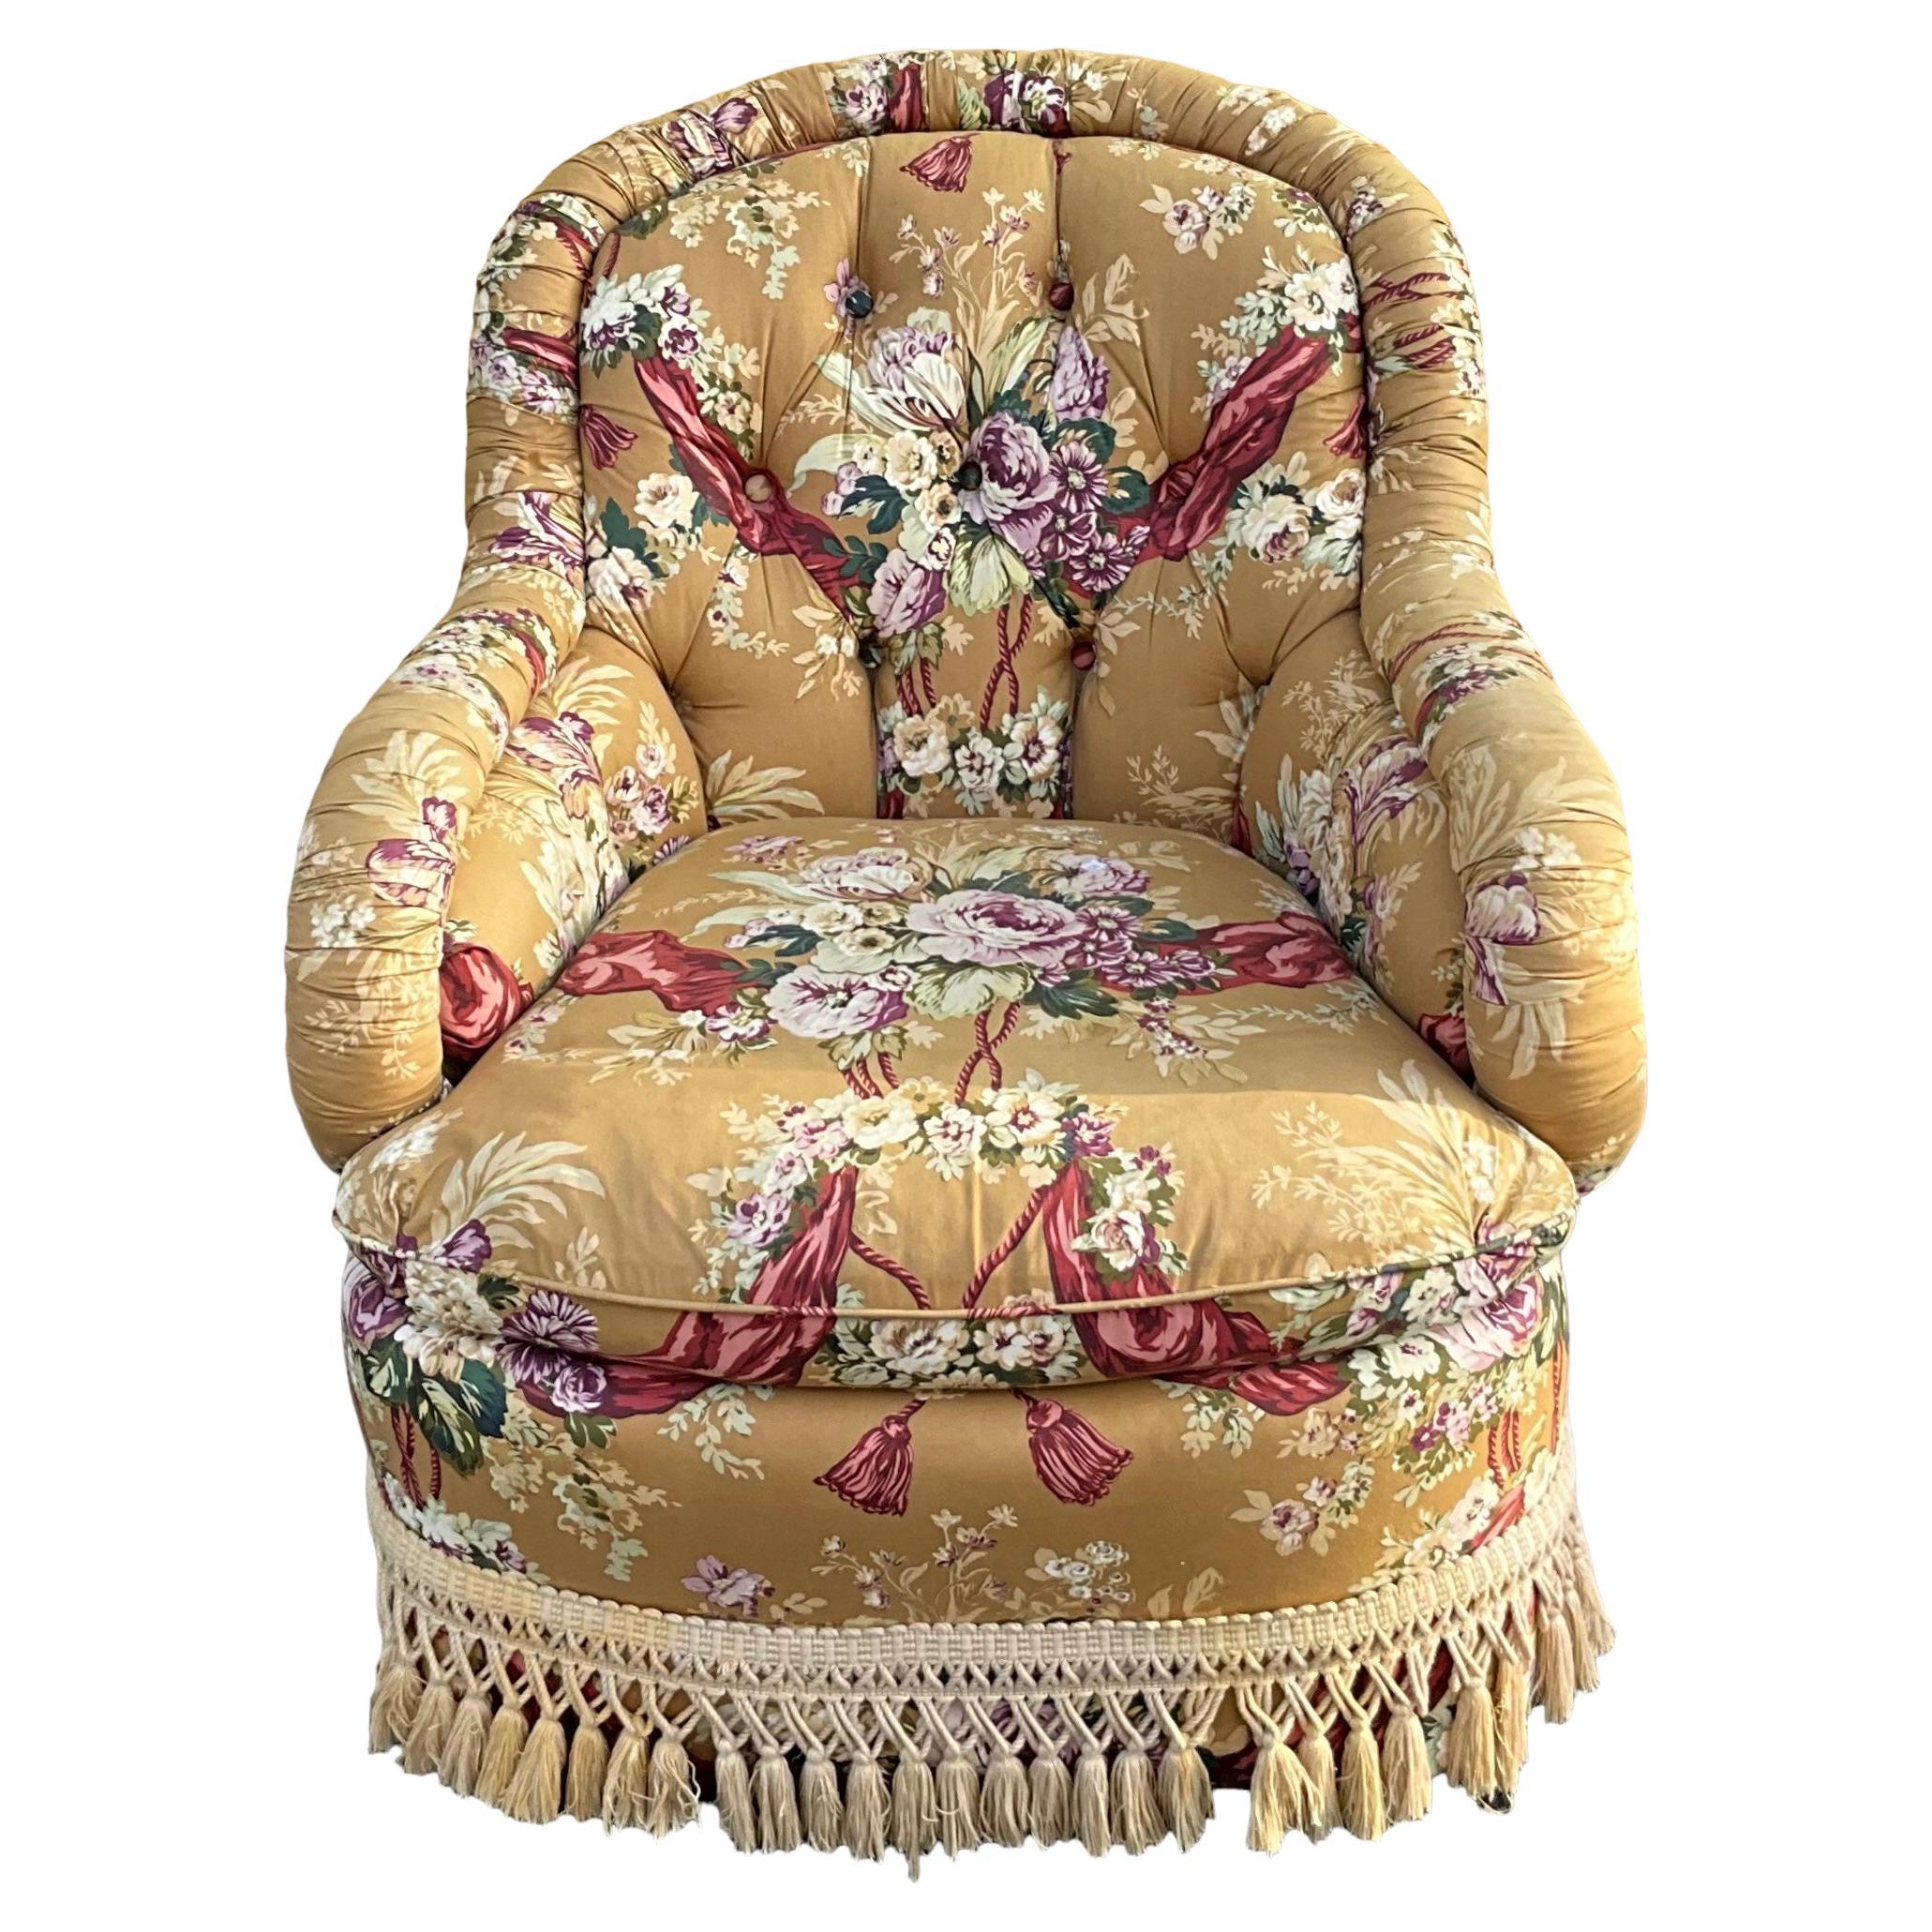 Baker Furniture English Victorian Style Club Chair In Vintage Chintz Upholstery 